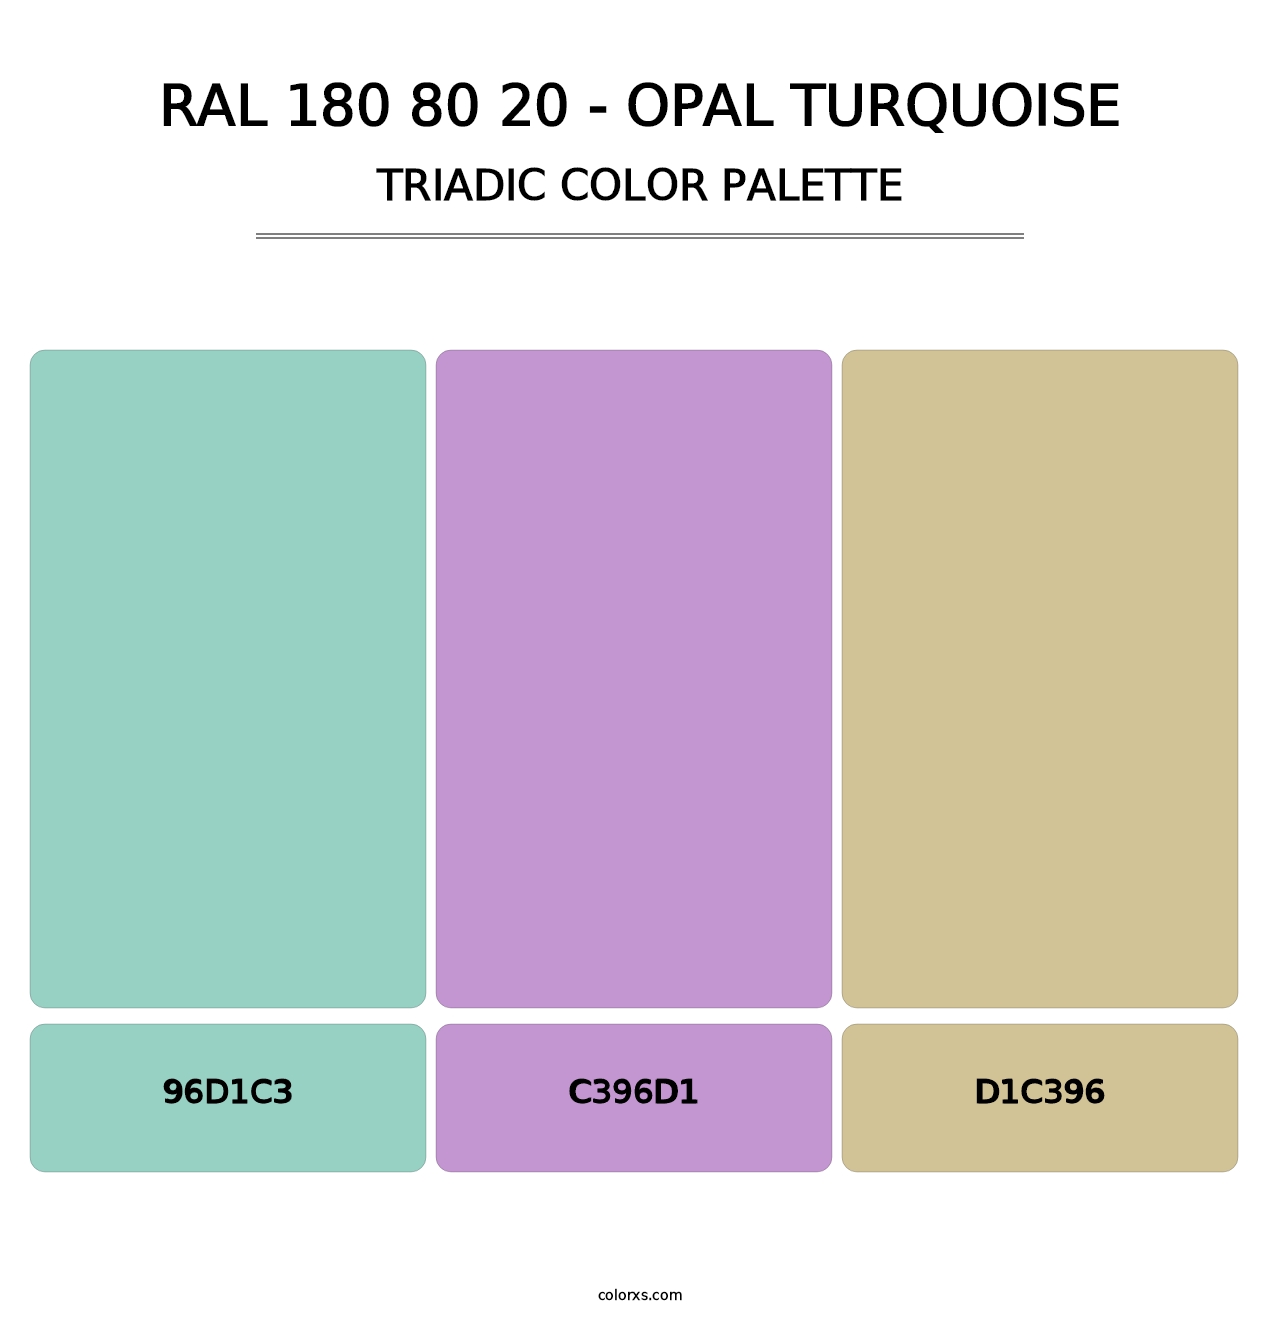 RAL 180 80 20 - Opal Turquoise - Triadic Color Palette